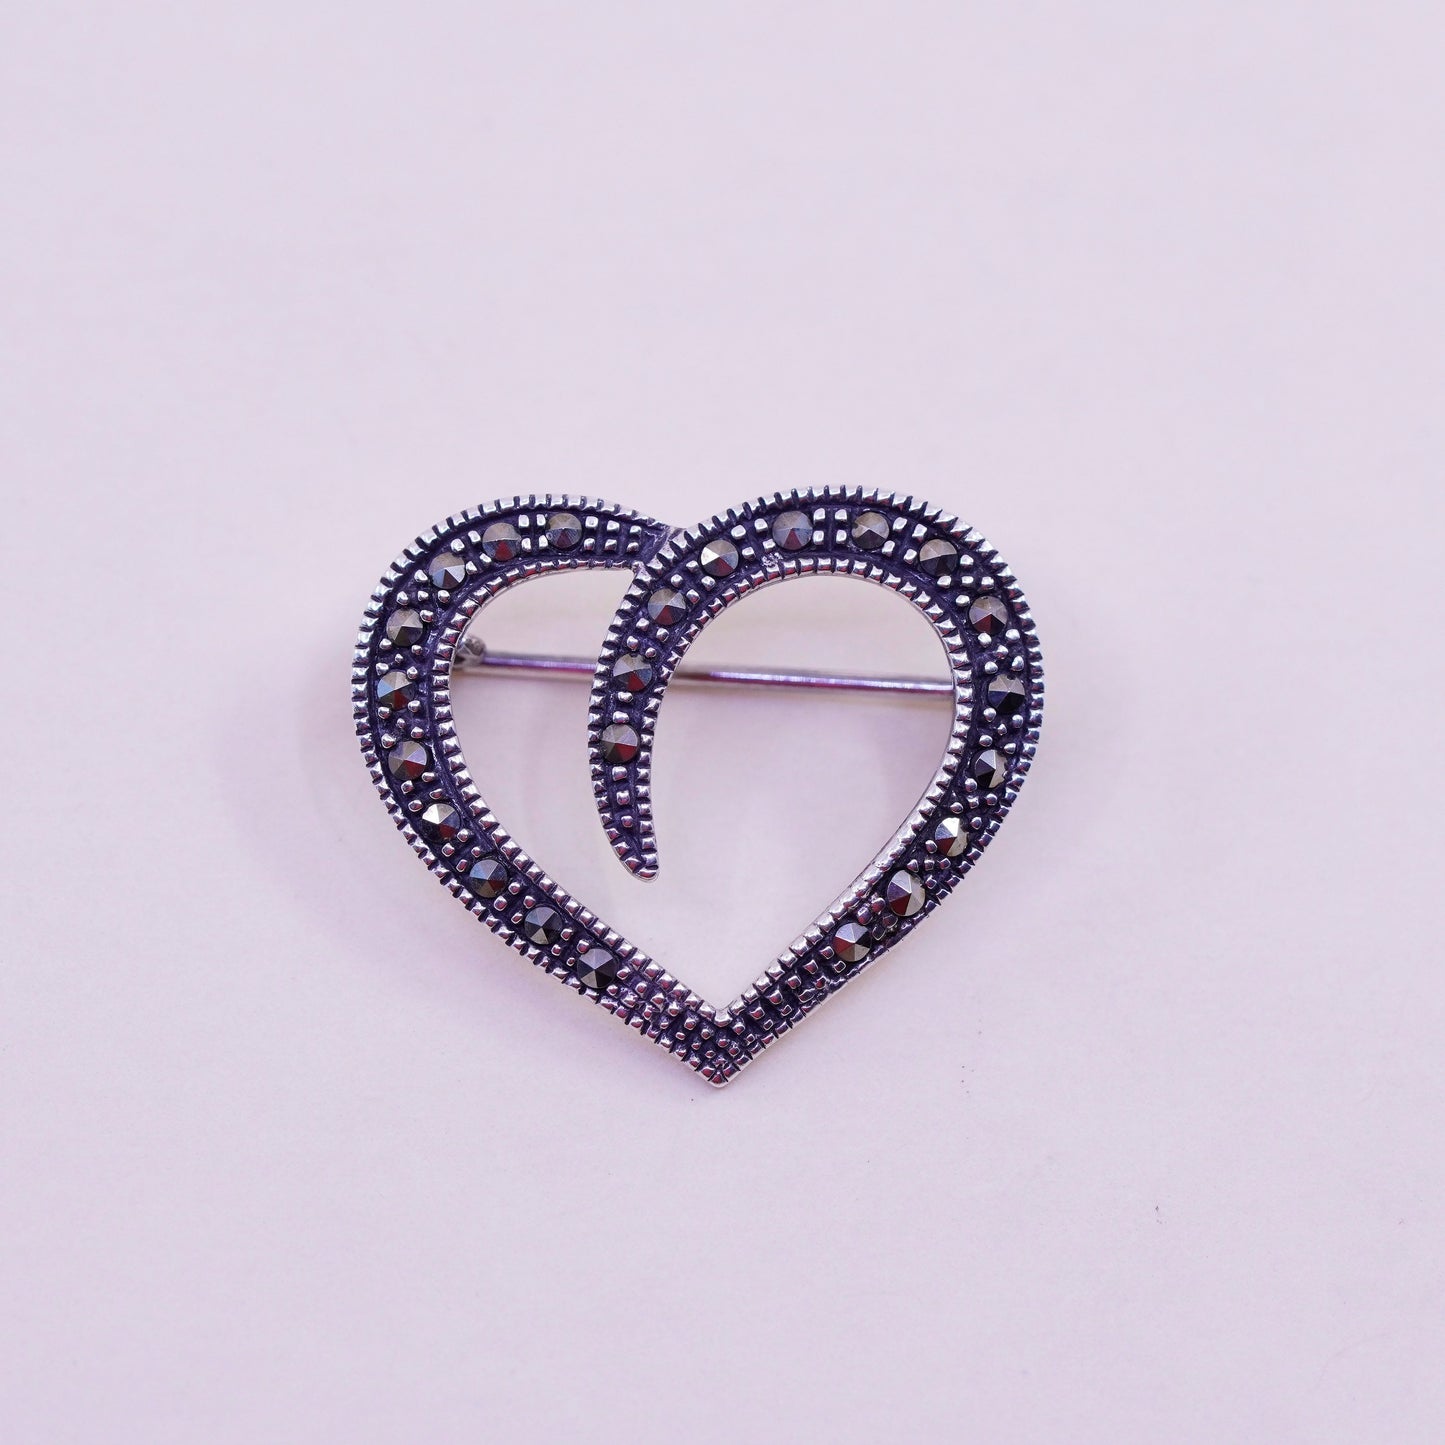 Vintage sterling silver handmade brooch, 925 heart with marcasite details